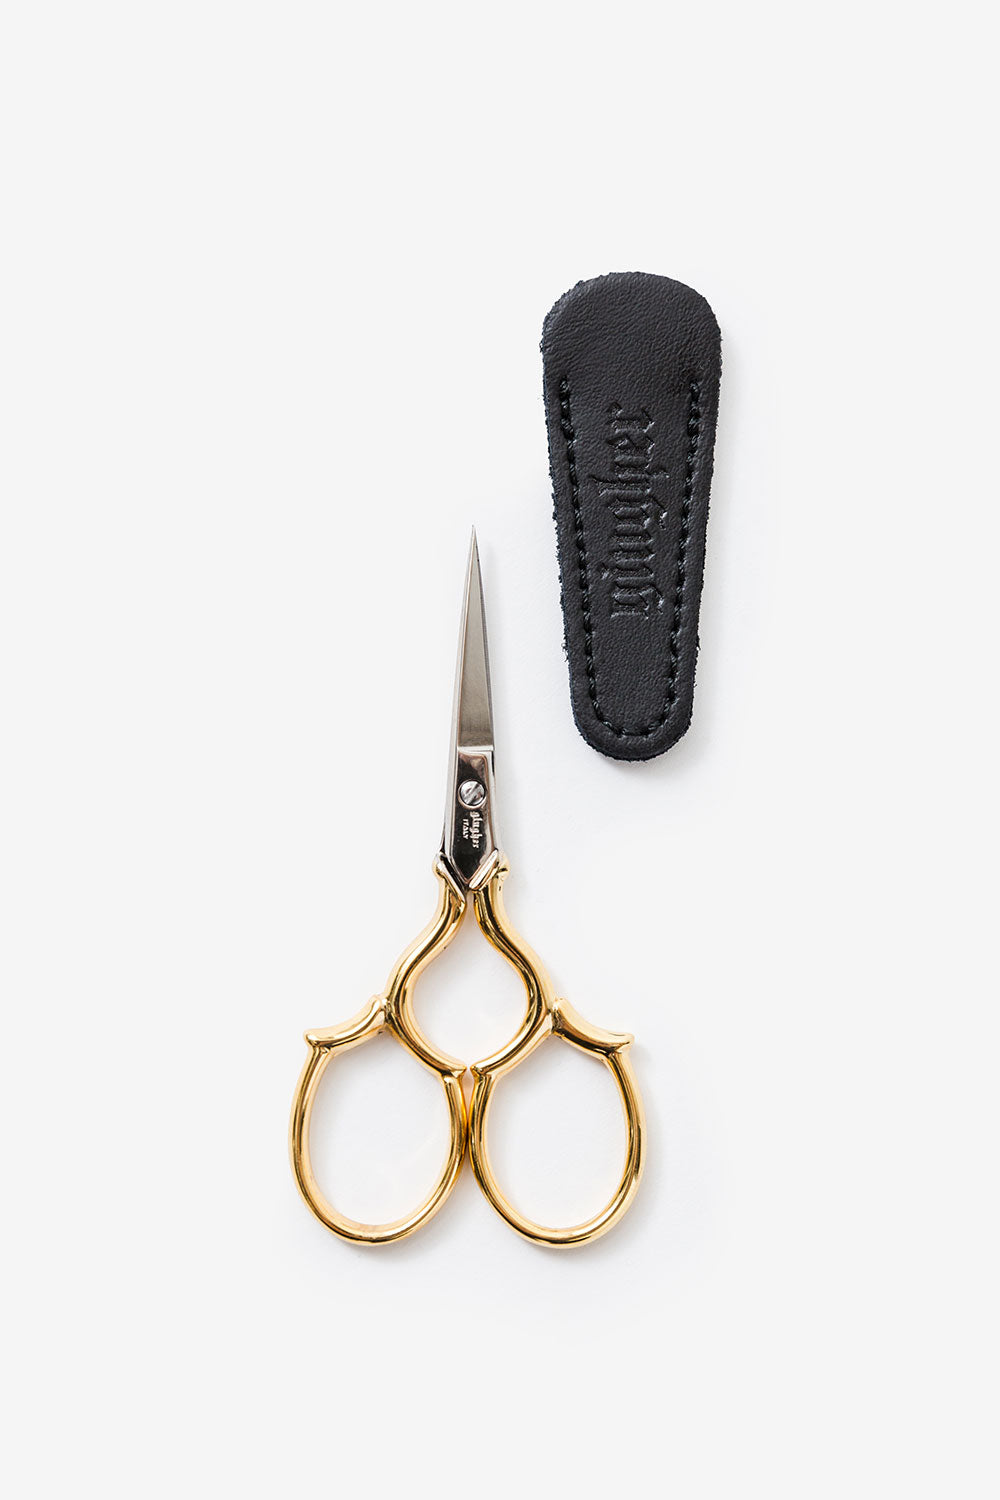 WunderStitch 3 Lift & Cut Embroidery Scissors - 2 Pack - SPECIAL PURCHASE